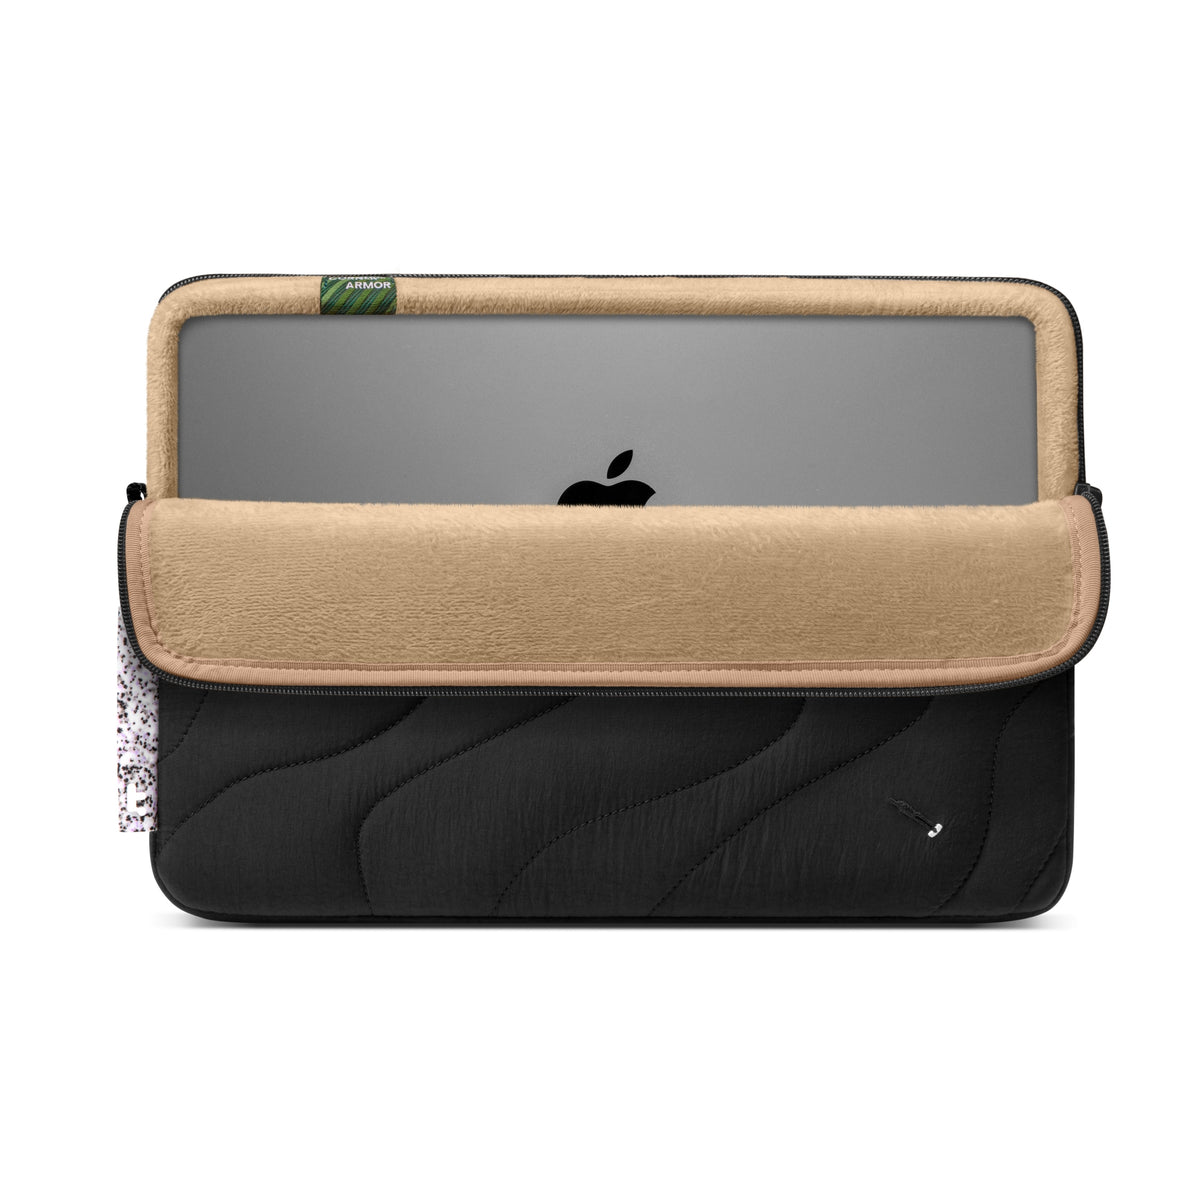 secondary_Terra-A27 Laptop Sleeve for 13-inch MacBook